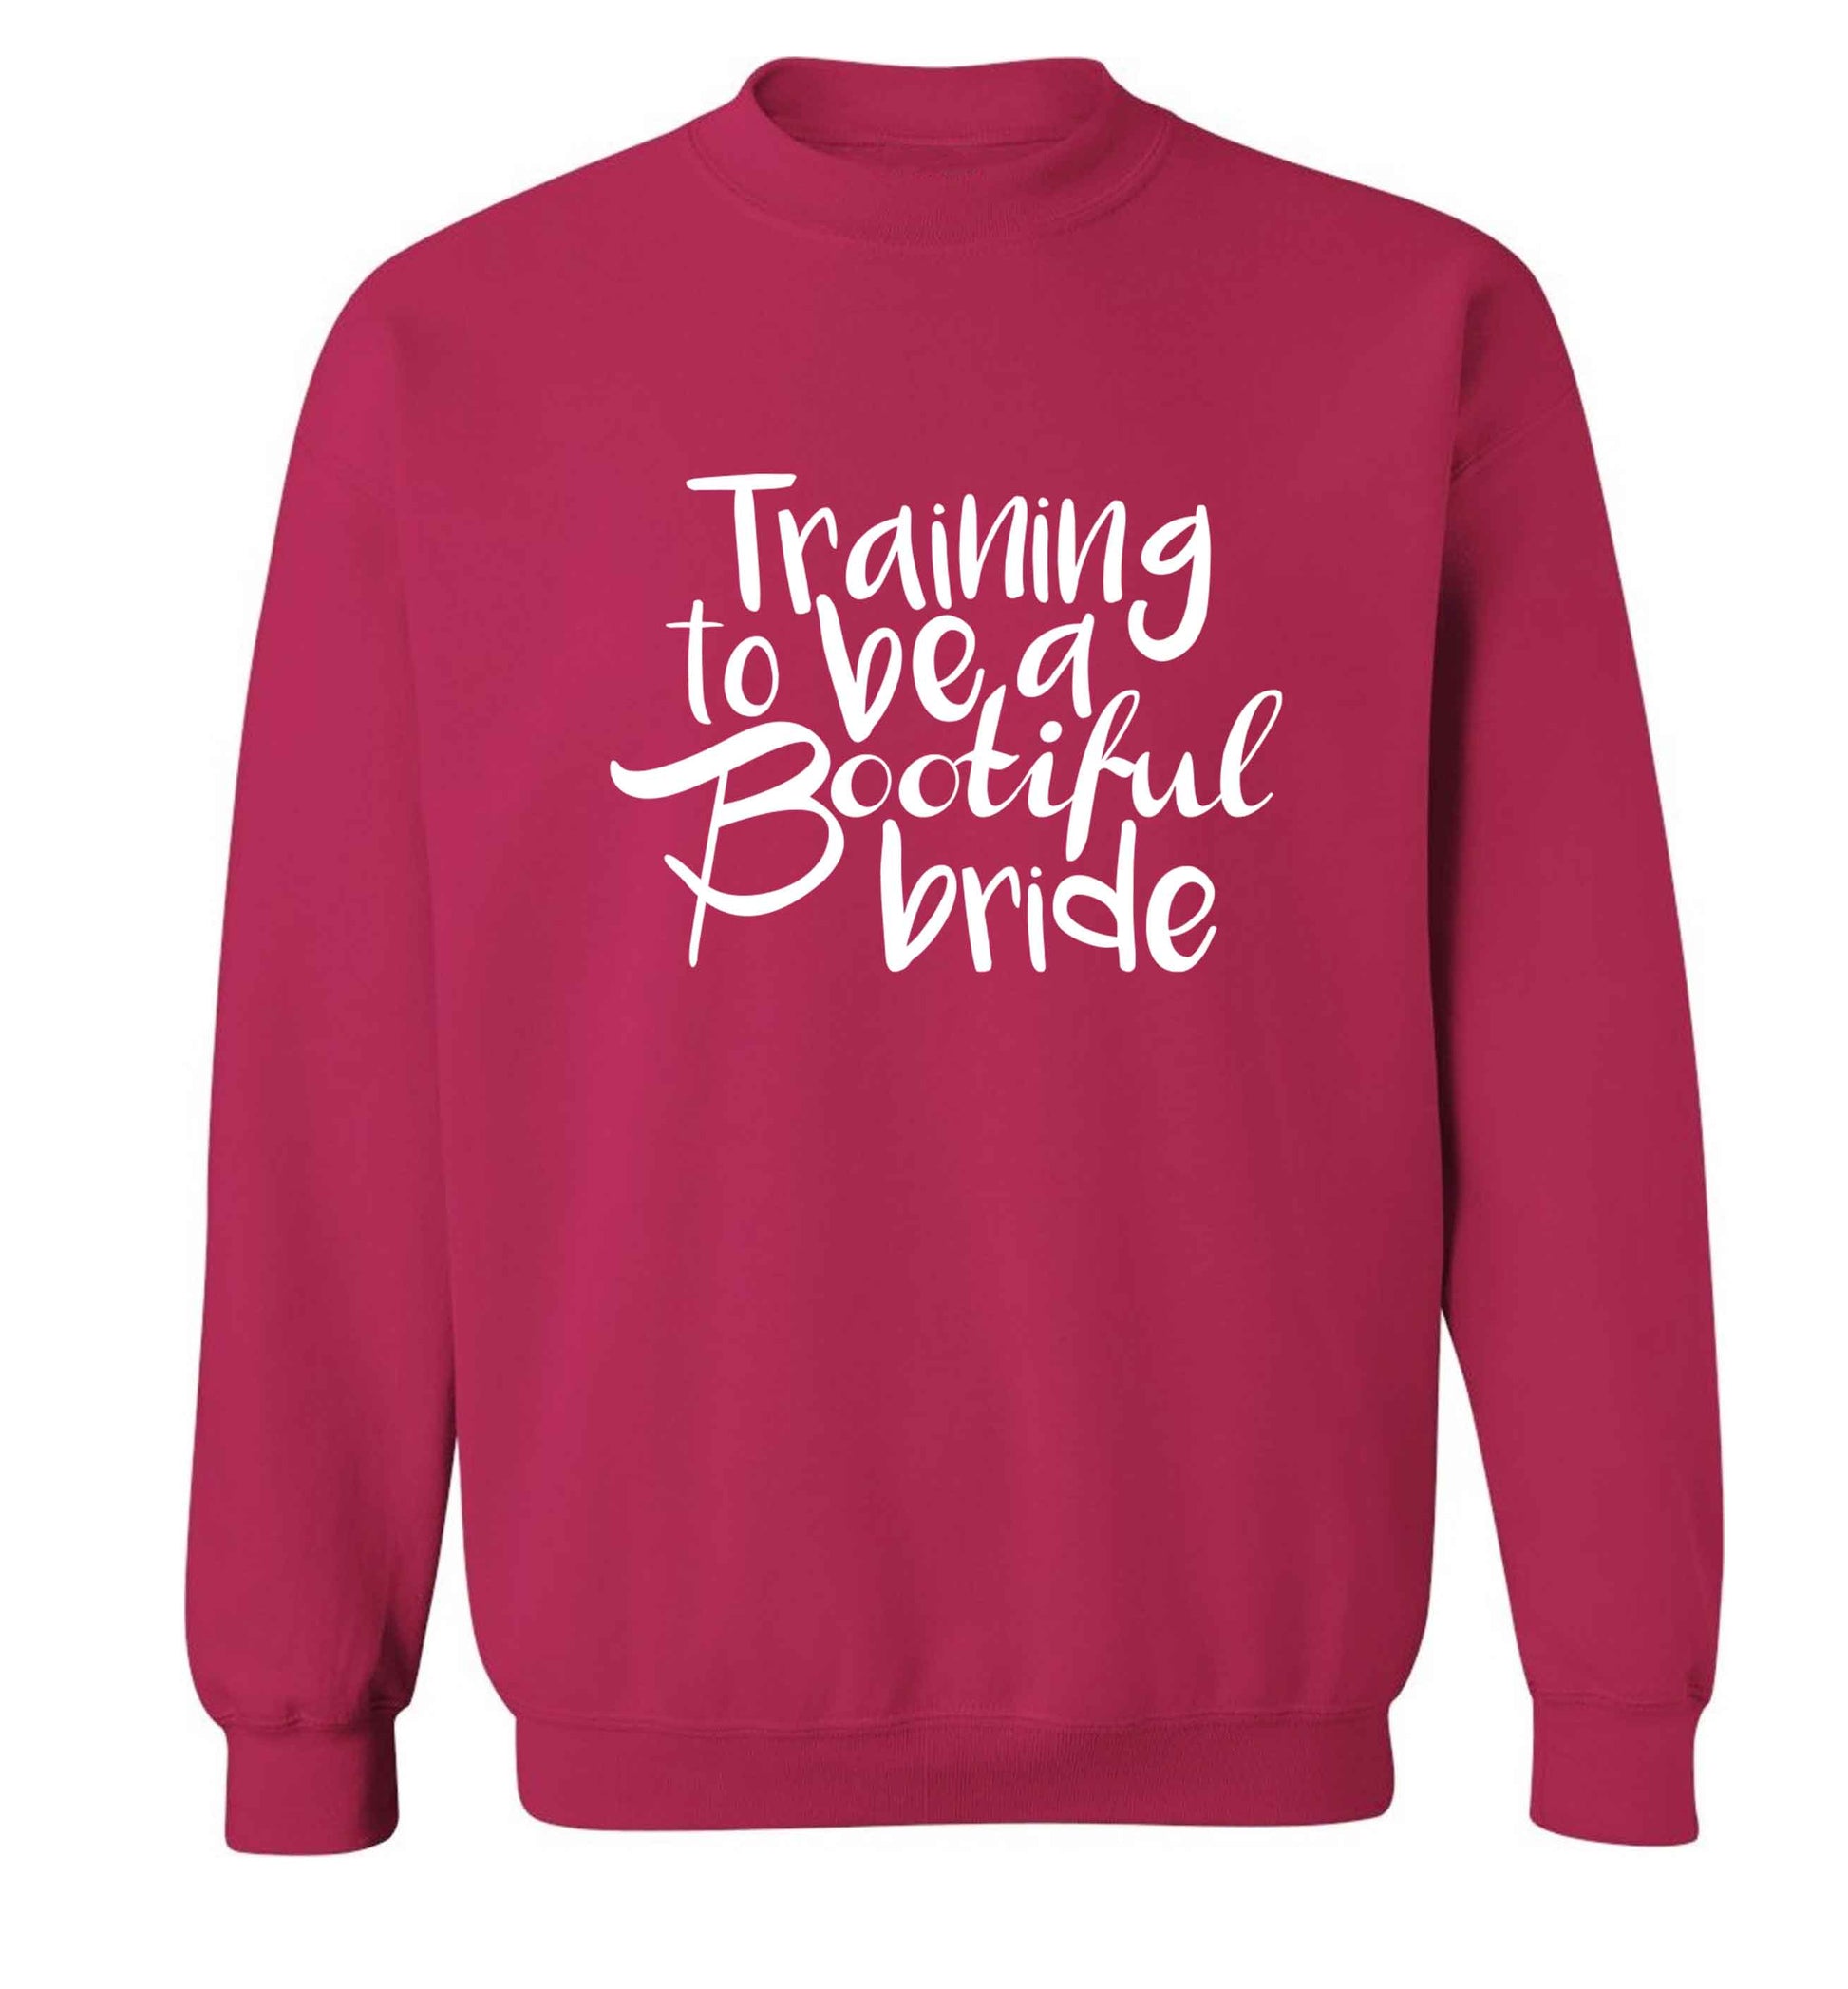 Get motivated and get fit for your big day! Our workout quotes and designs will get you ready to sweat! Perfect for any bride, groom or bridesmaid to be!  adult's unisex pink sweater 2XL